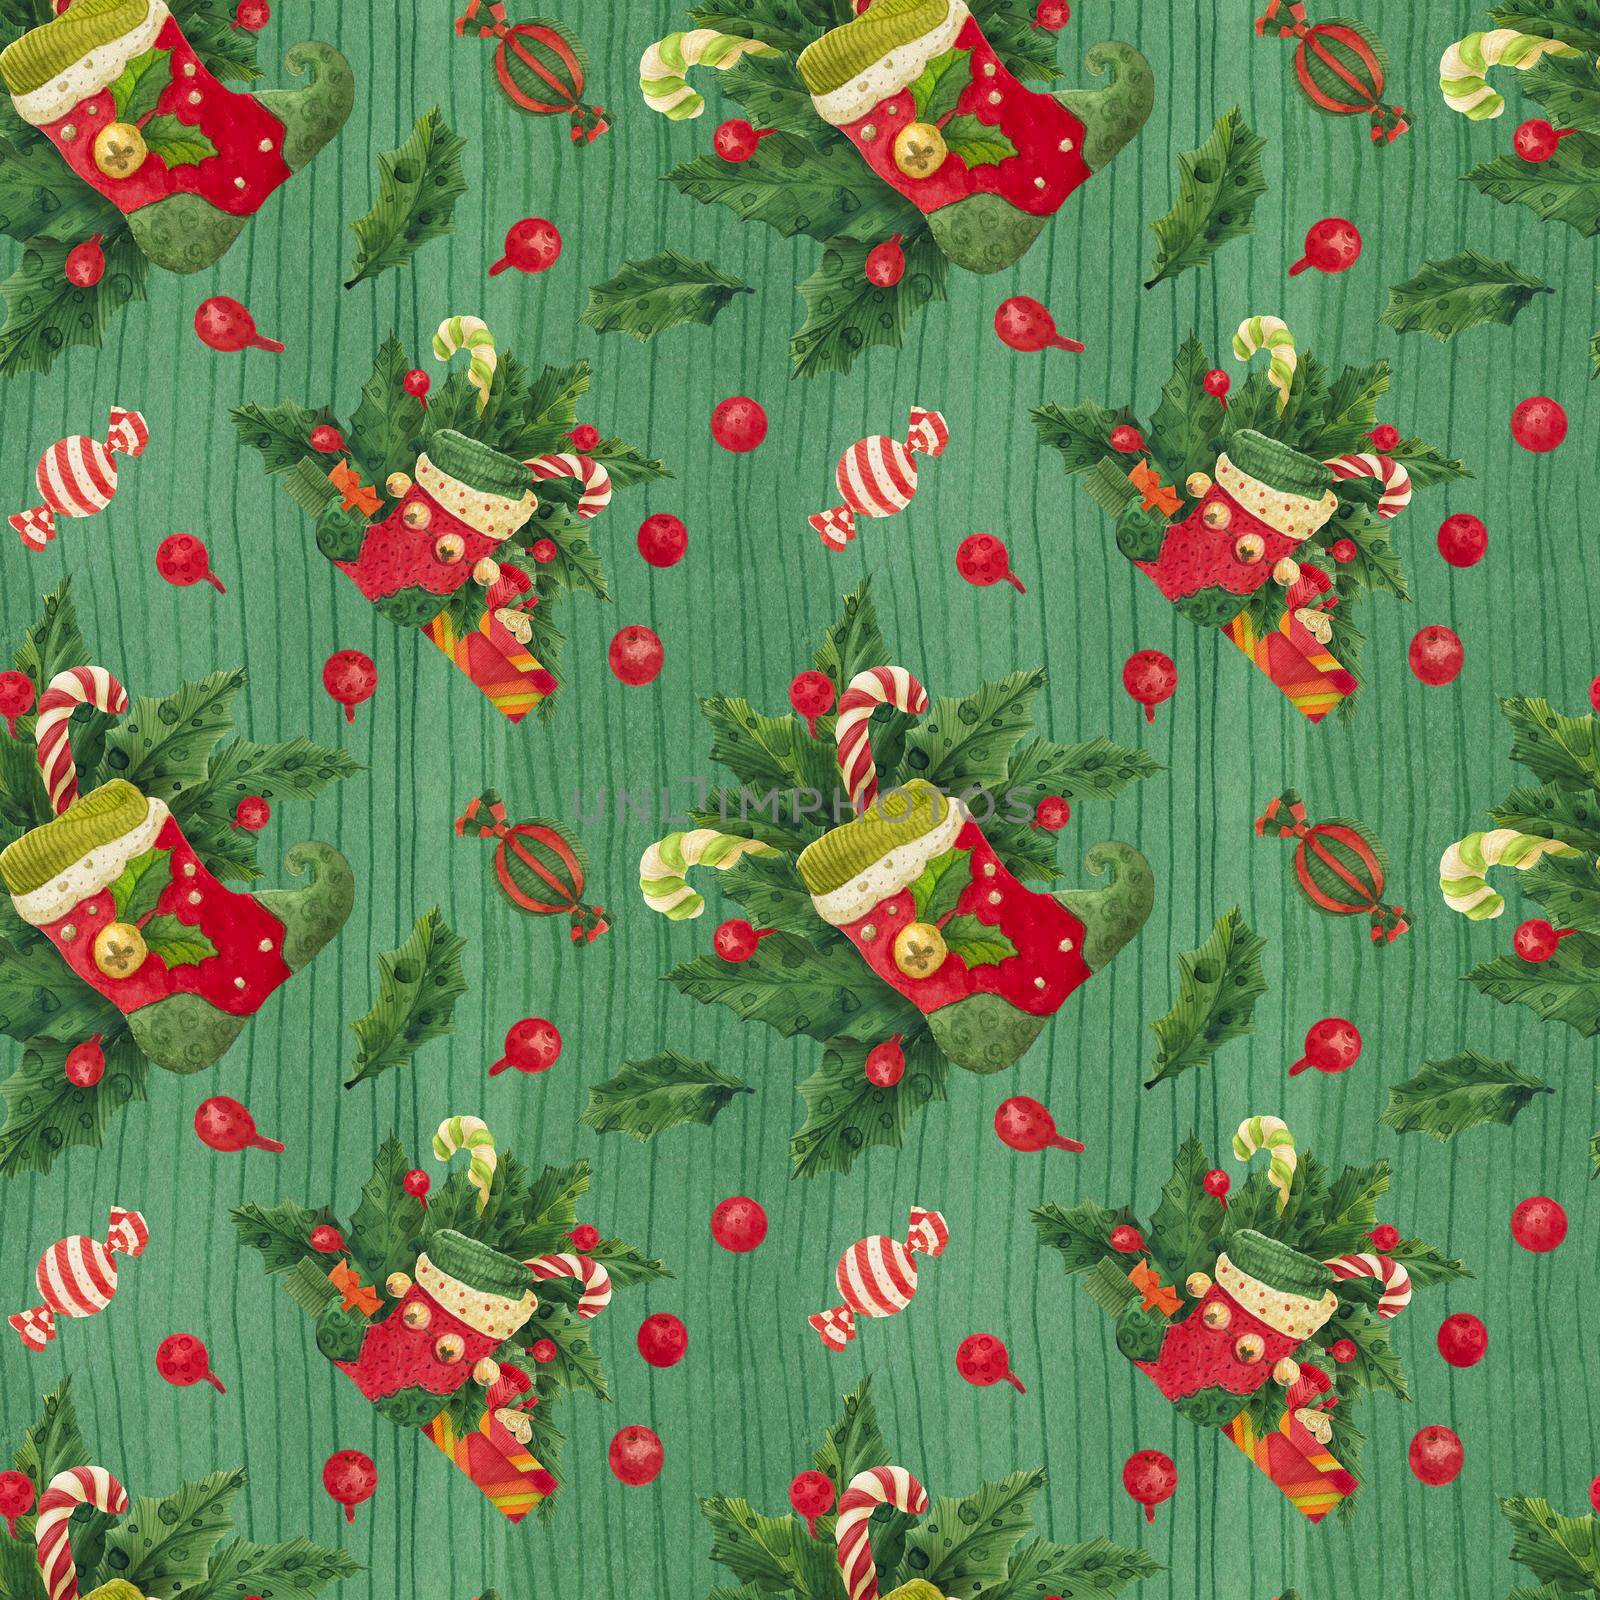 Christmas Holly green pattern with elf stockings and candy canes by Xeniasnowstorm